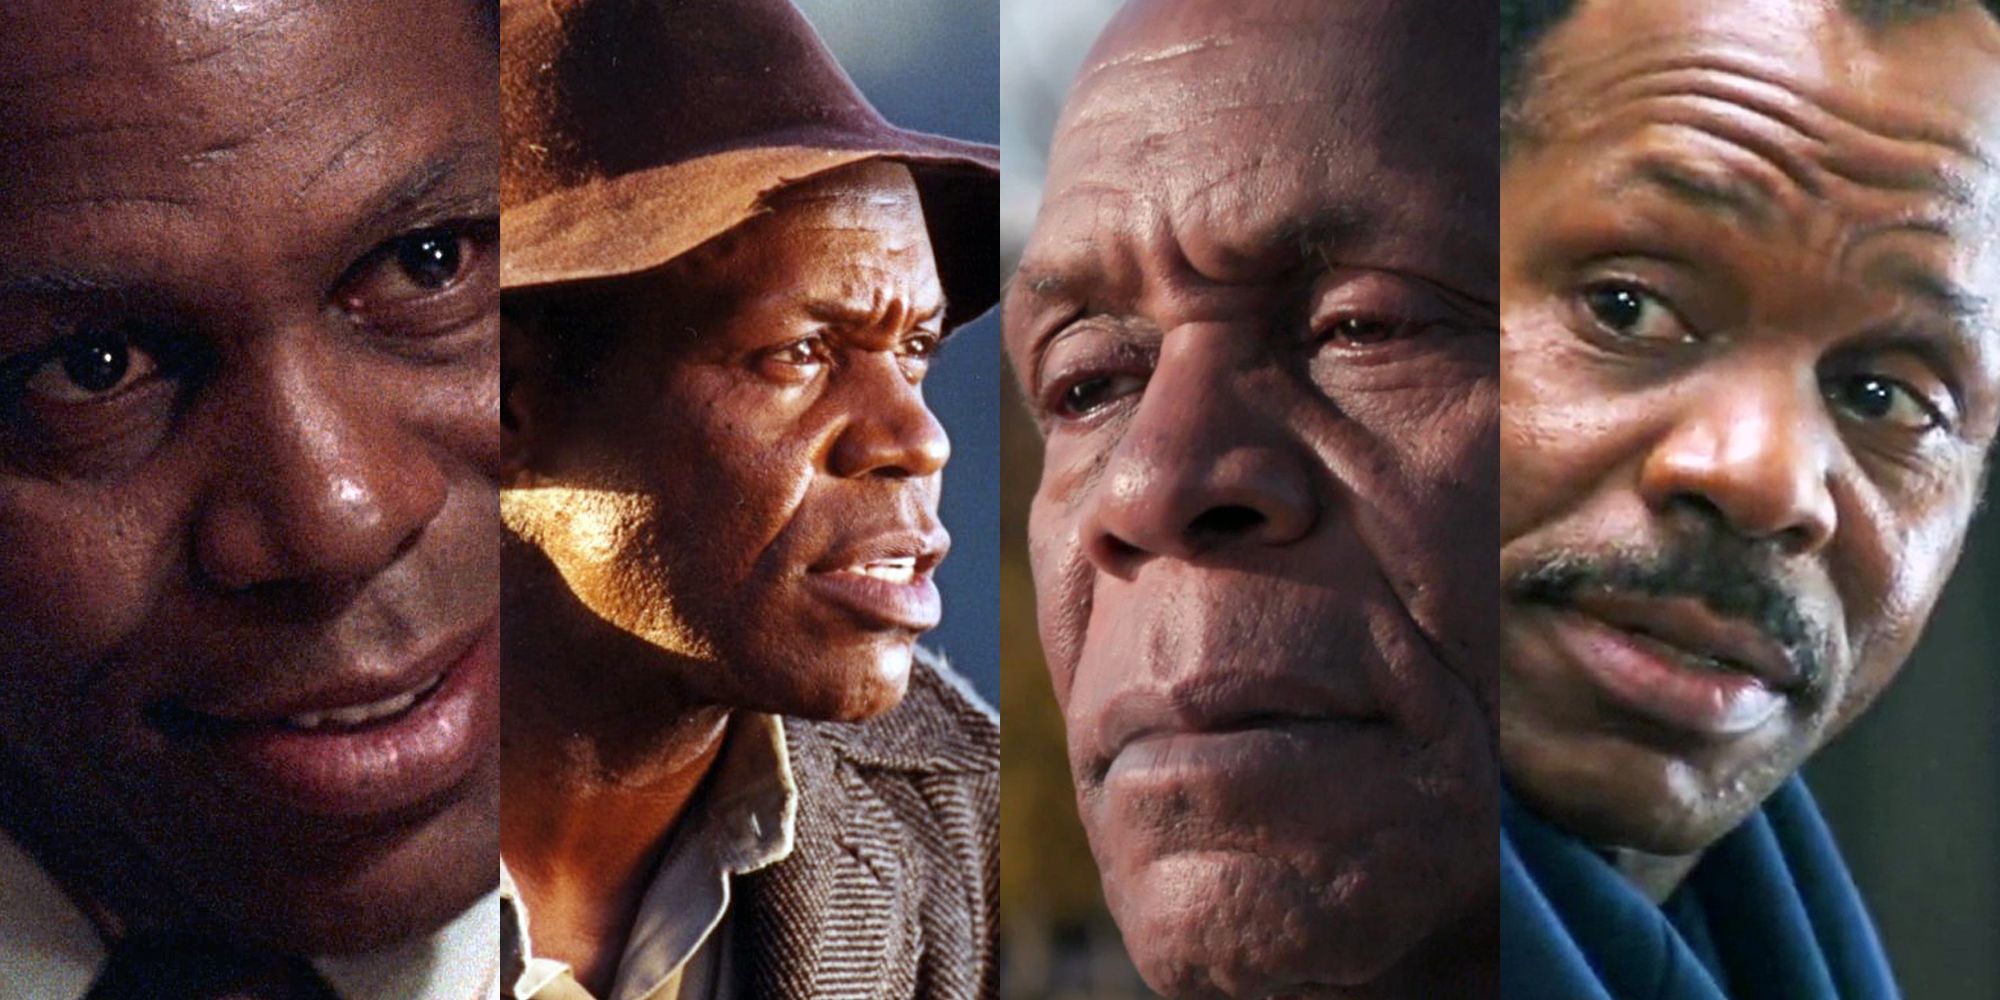 Danny Glover has been a presence on stage, screen and television for over 35 years